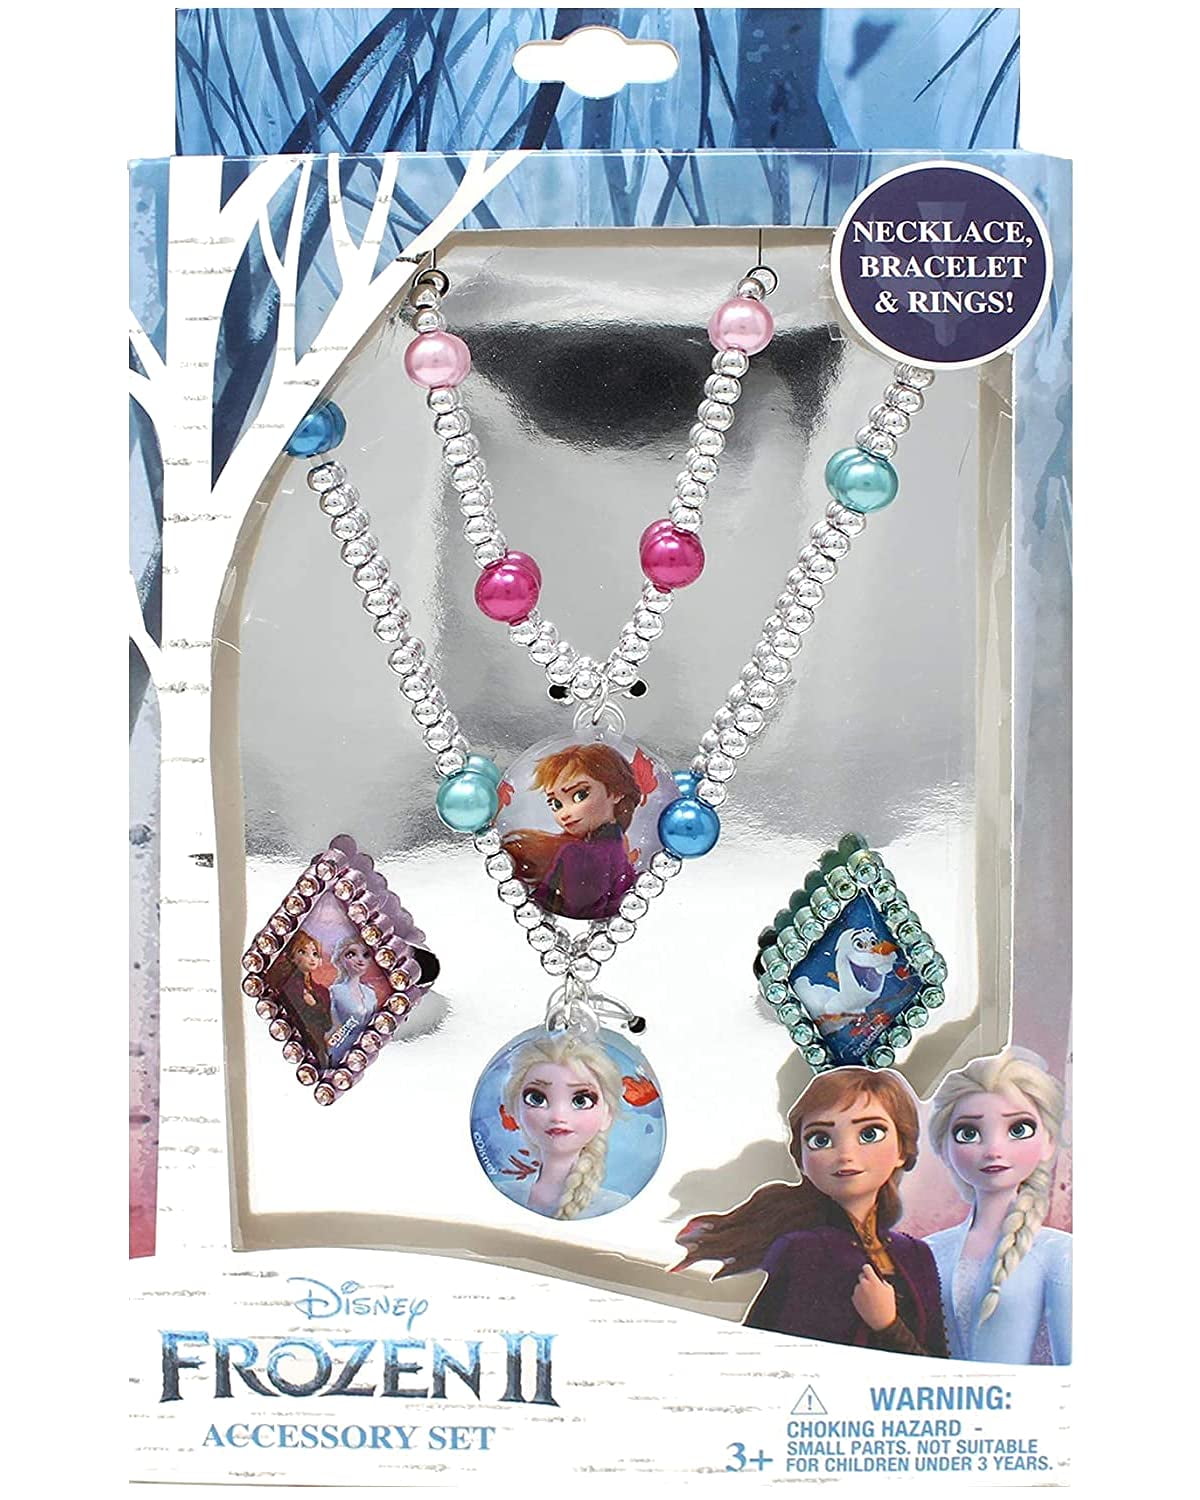 LUV HER Barbie Accessories for Girls 6 Piece Toy Jewelry Box Set with 2  Rings, 2 Bead Bracelets, and Snap Hair Clips Ages 3+